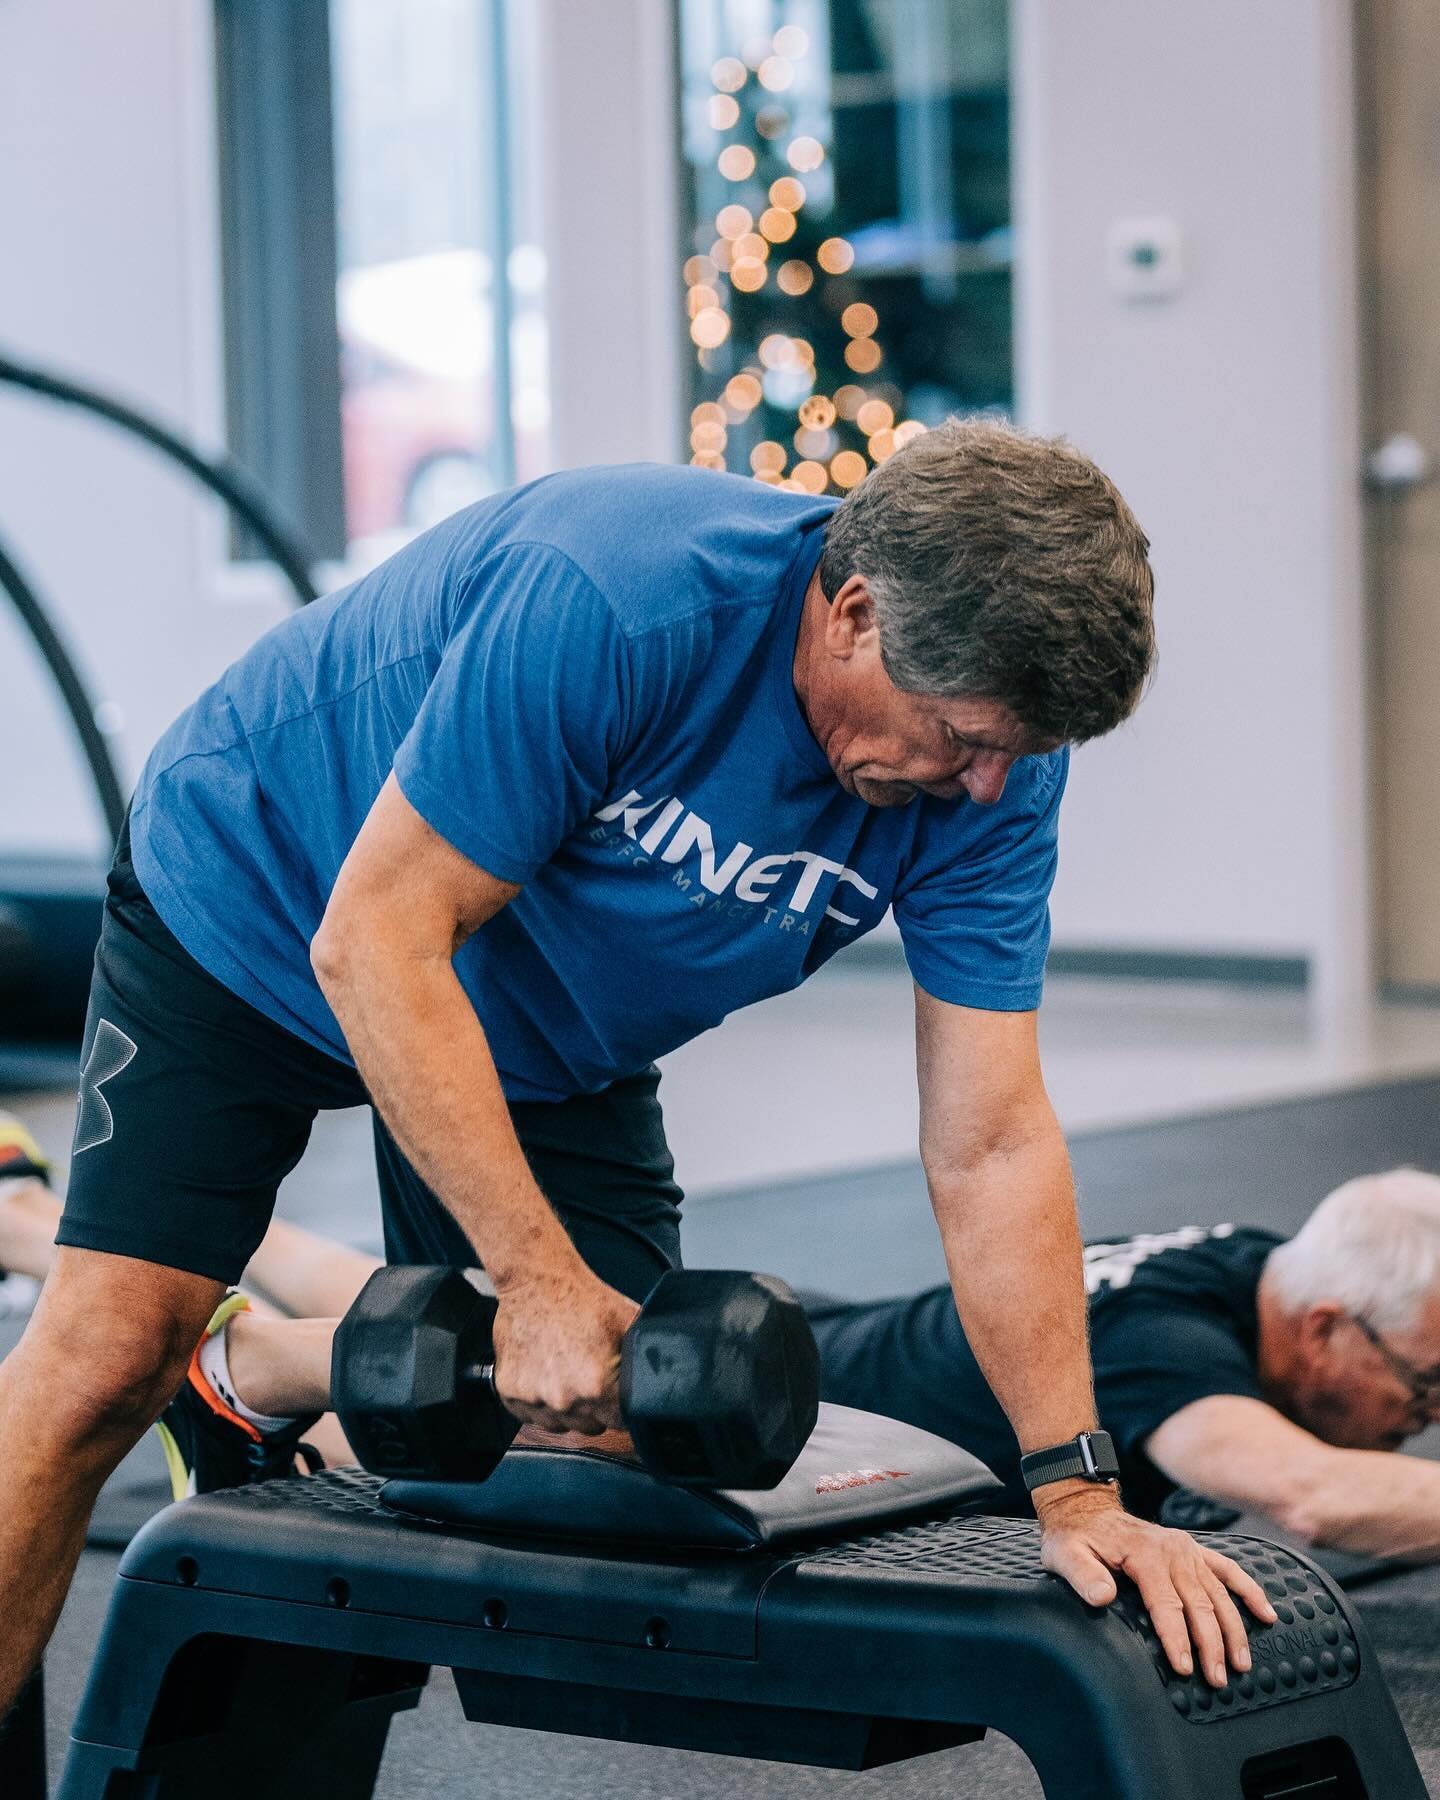 &ldquo;I loved my first workout at Kinetic Performance Training. 
No colored lights, no gimmicks, no mirrors;  it was just a great workout.  I can&rsquo;t wait to come back, I know I am going to see great results.&rdquo; - Joe

Thanks Joe! We are pro